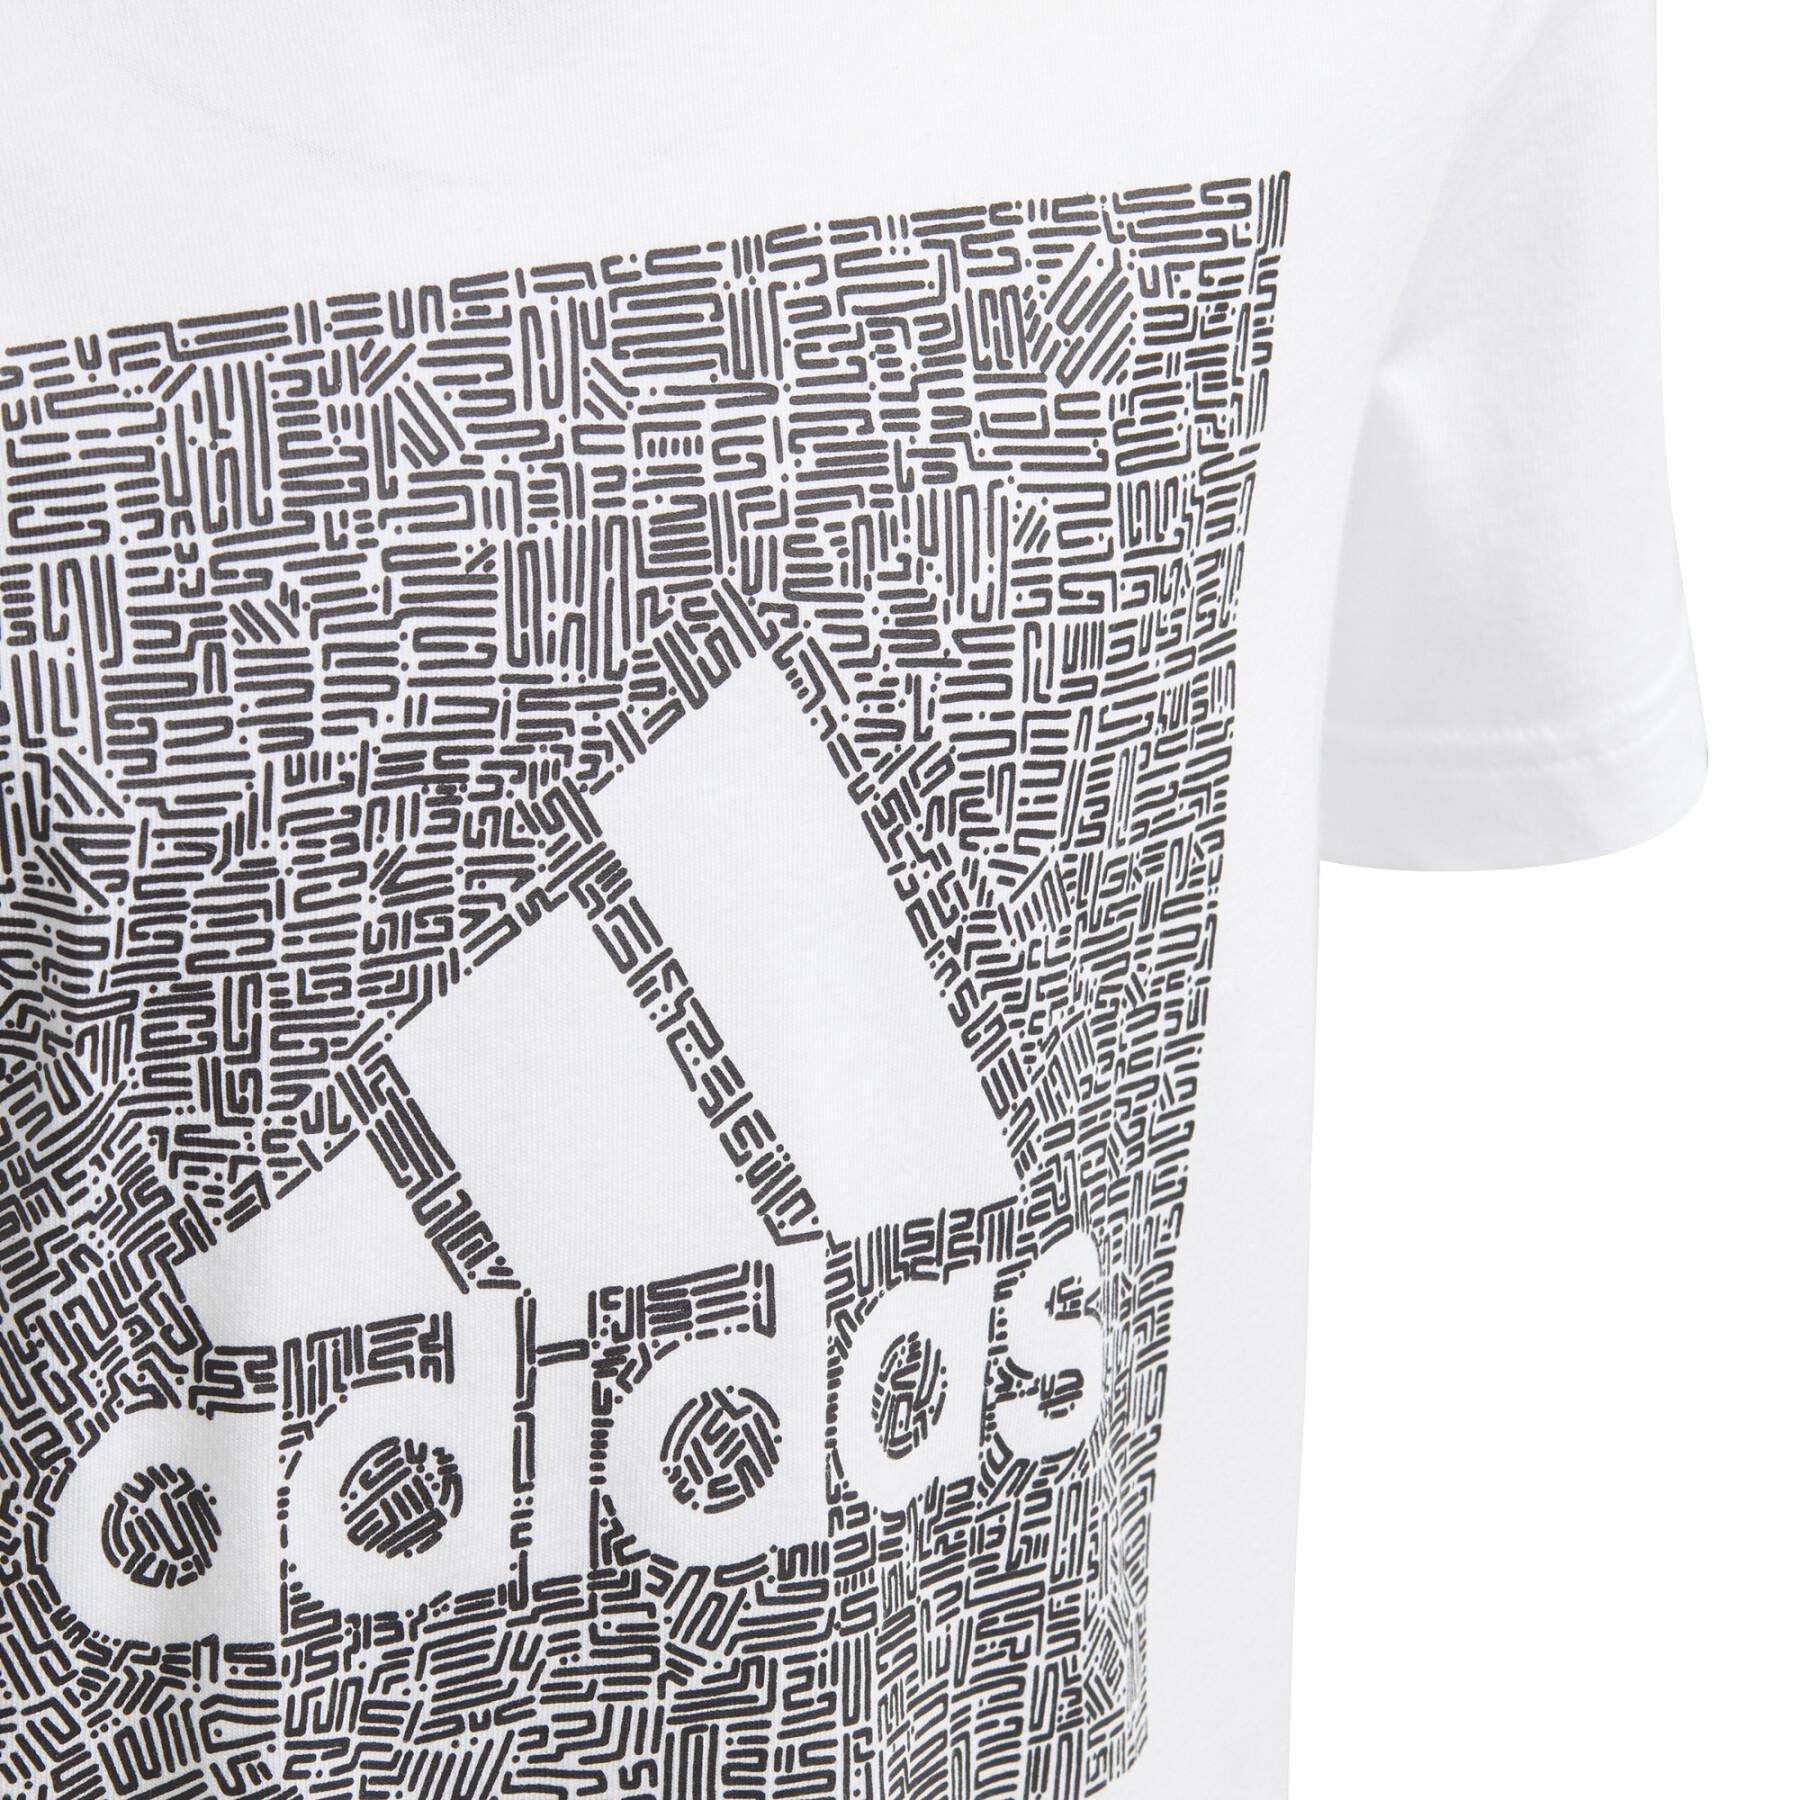 Child's T-shirt adidas Must Haves Badge of Sport Box